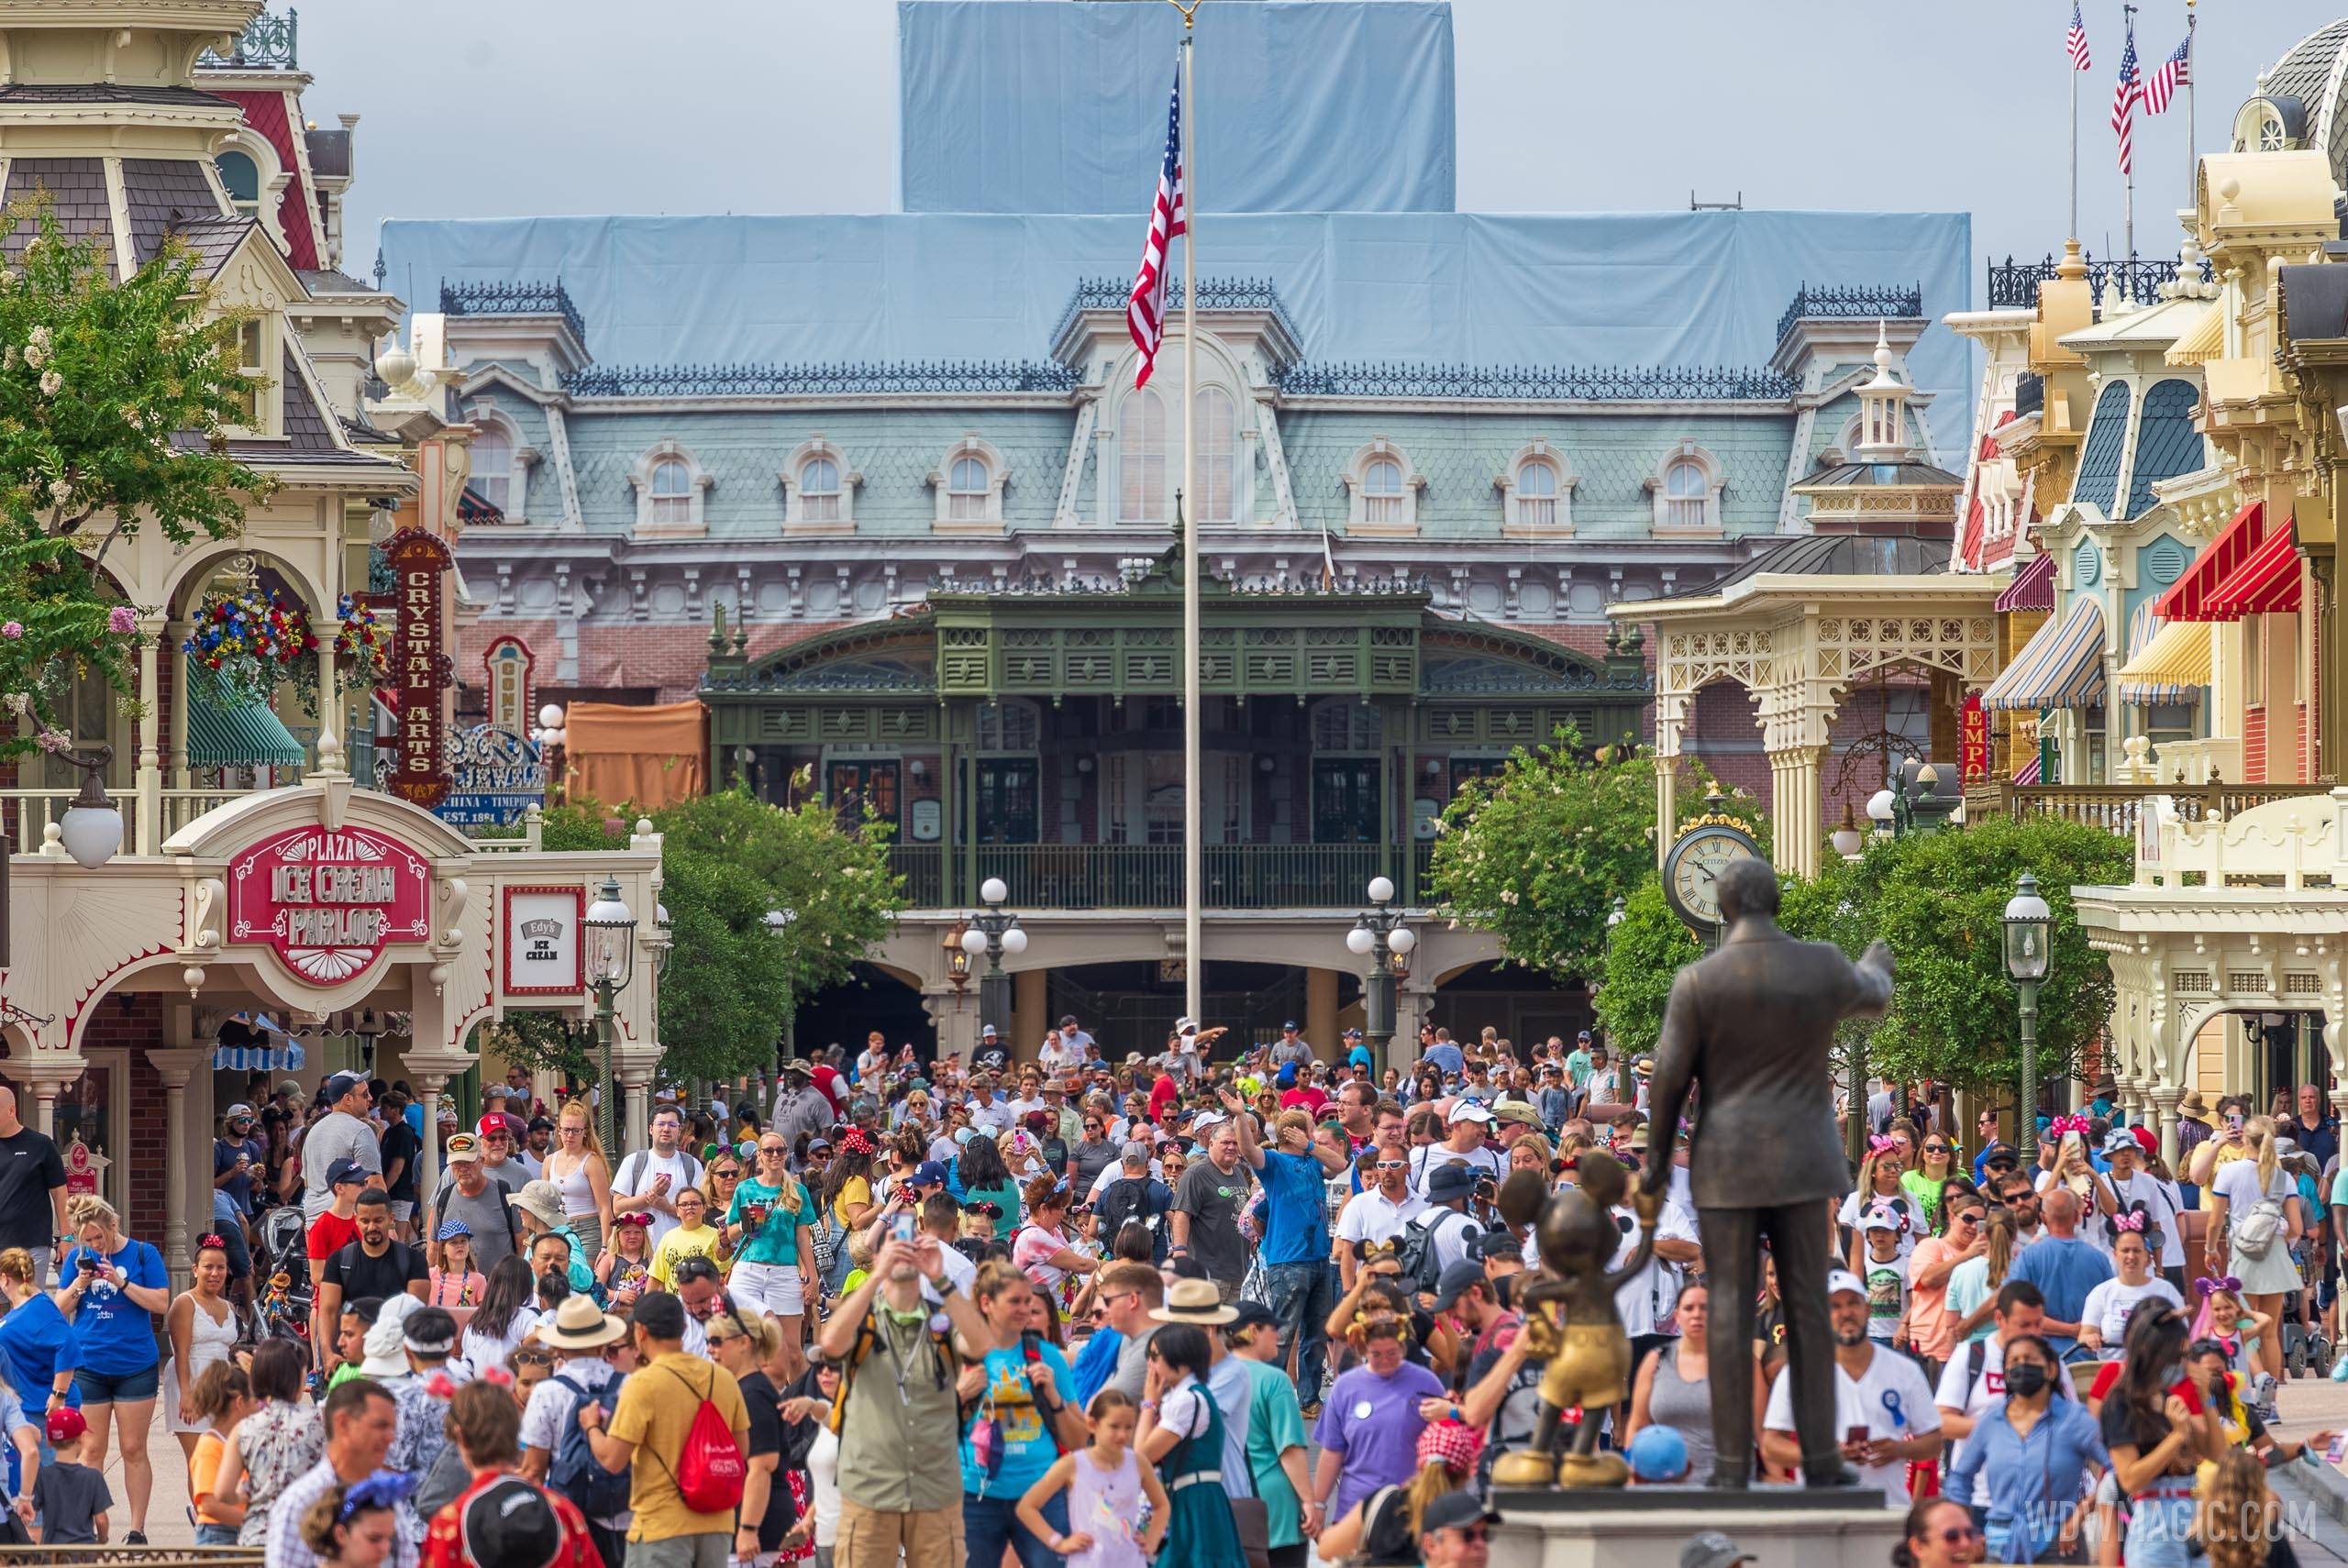 Most Disney World guests are not wearing masks either indoor or outdoors as the new rules come into effect